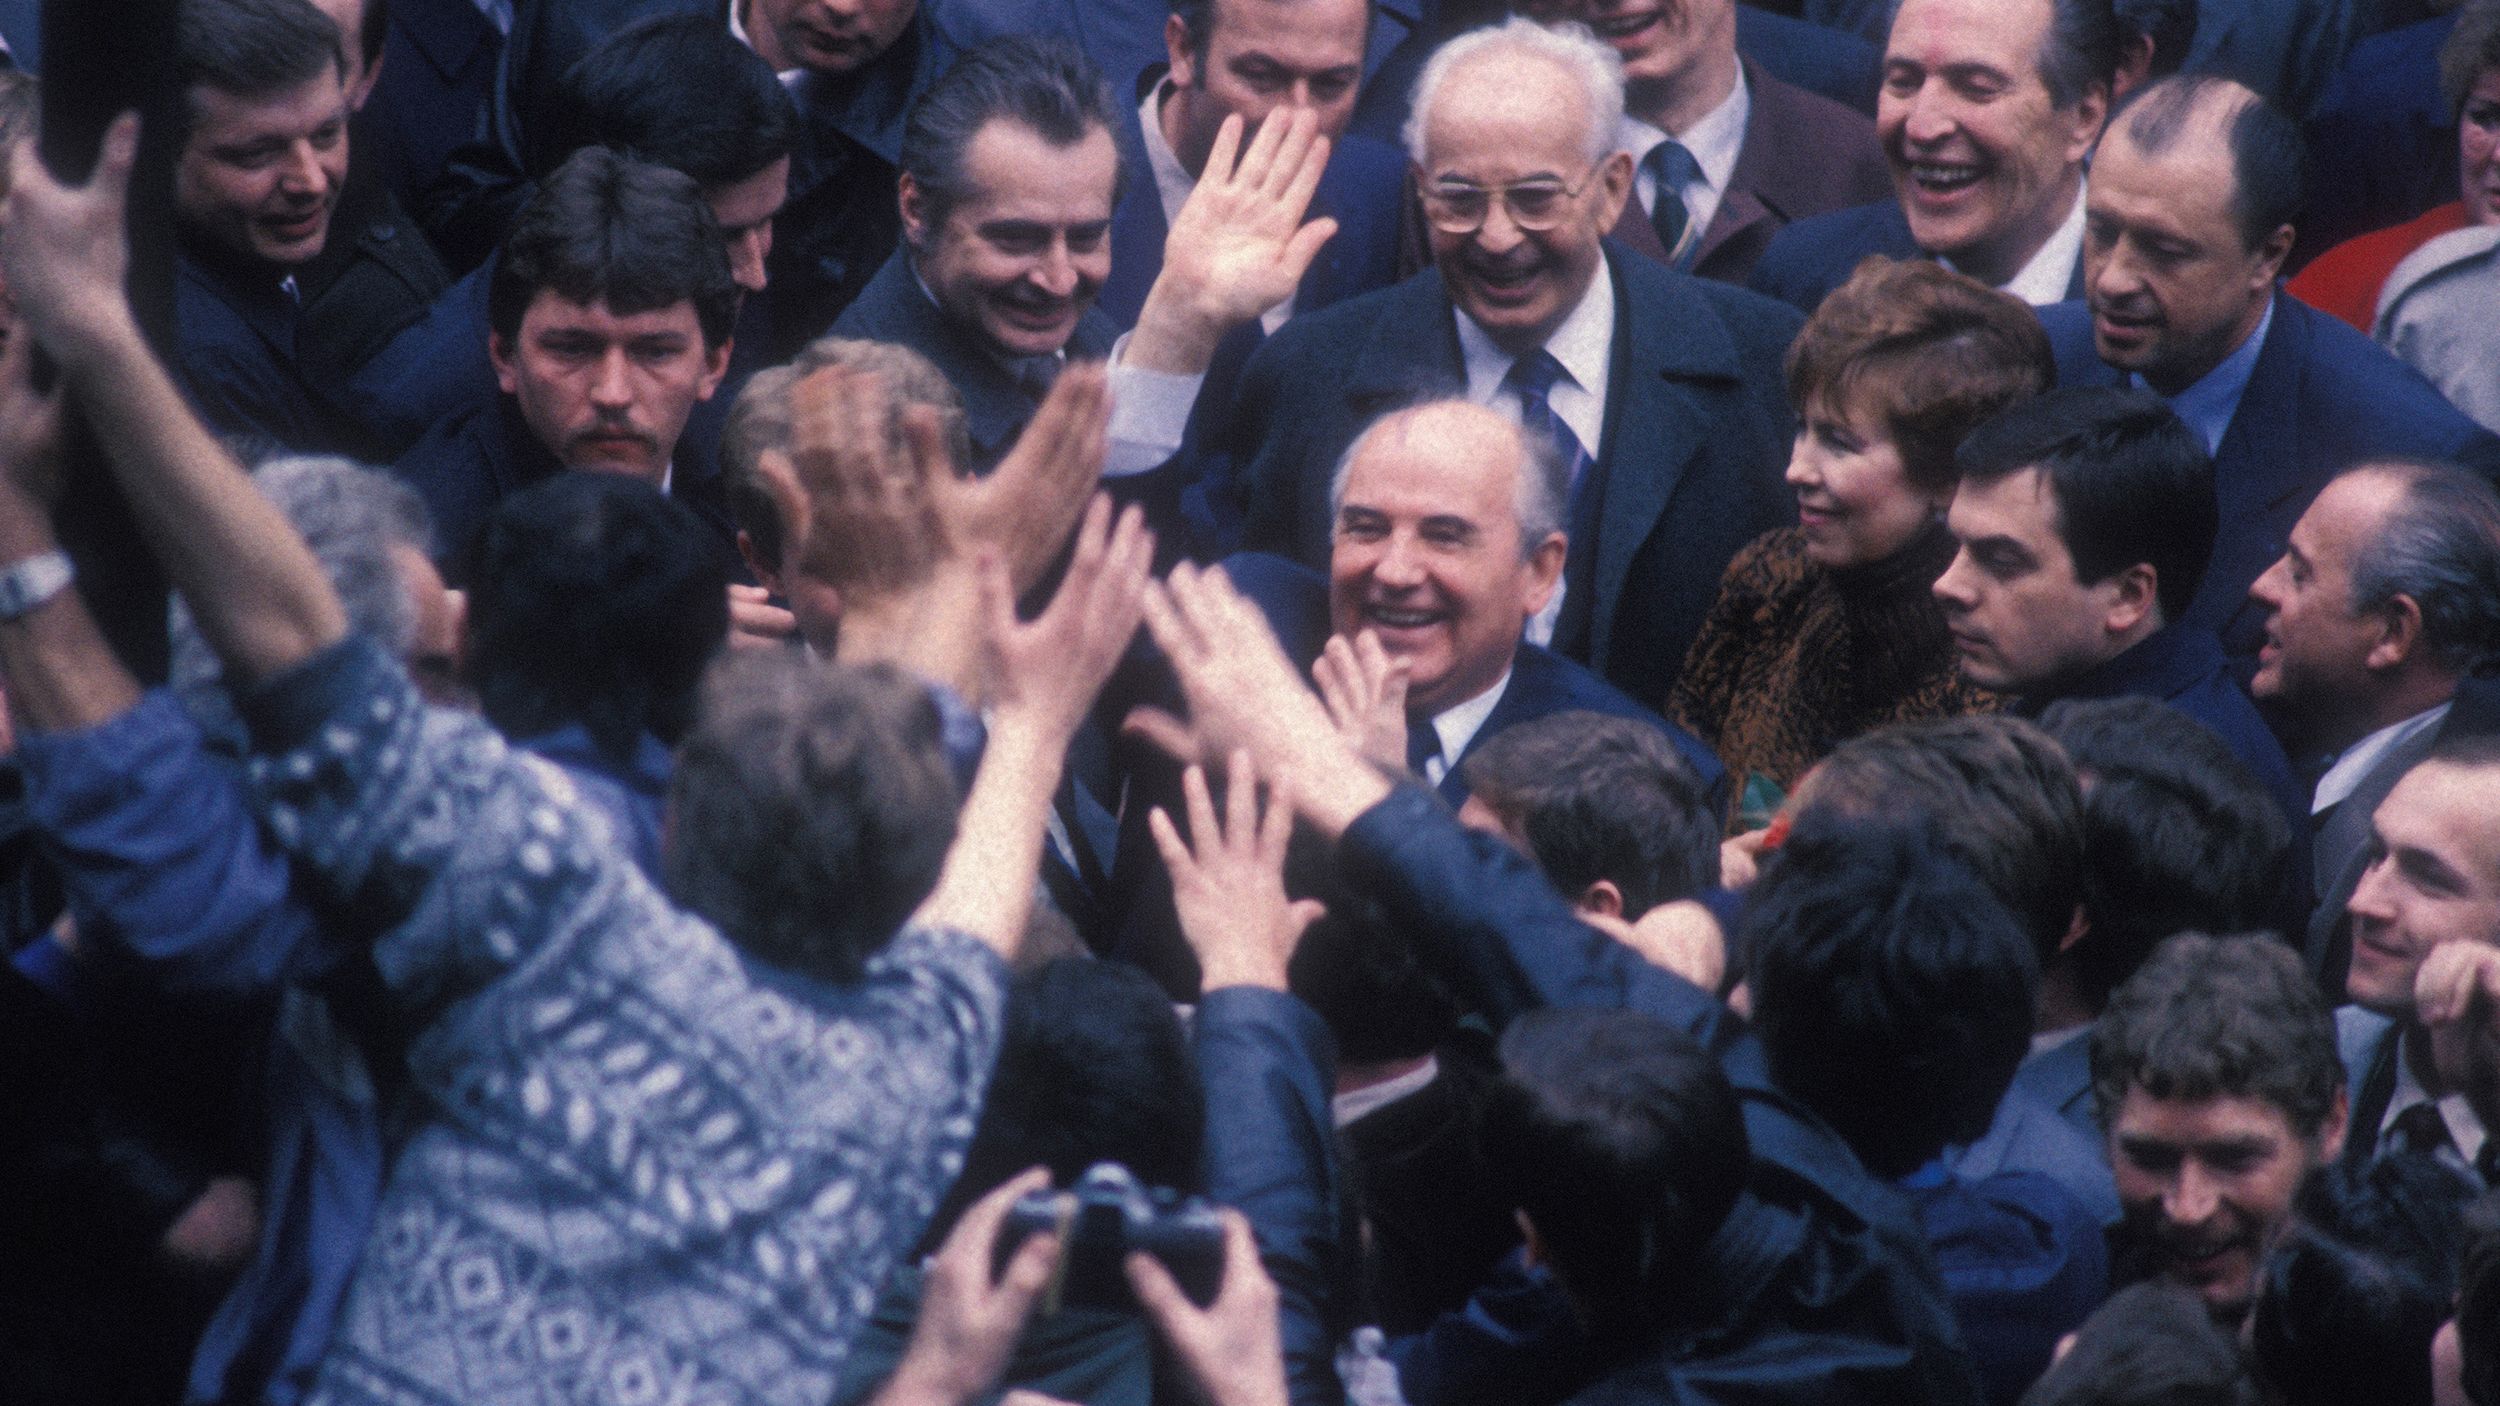 Gorbachev and his wife, Raisa, are welcomed in Prague, Czechoslovakia, in April 1987.